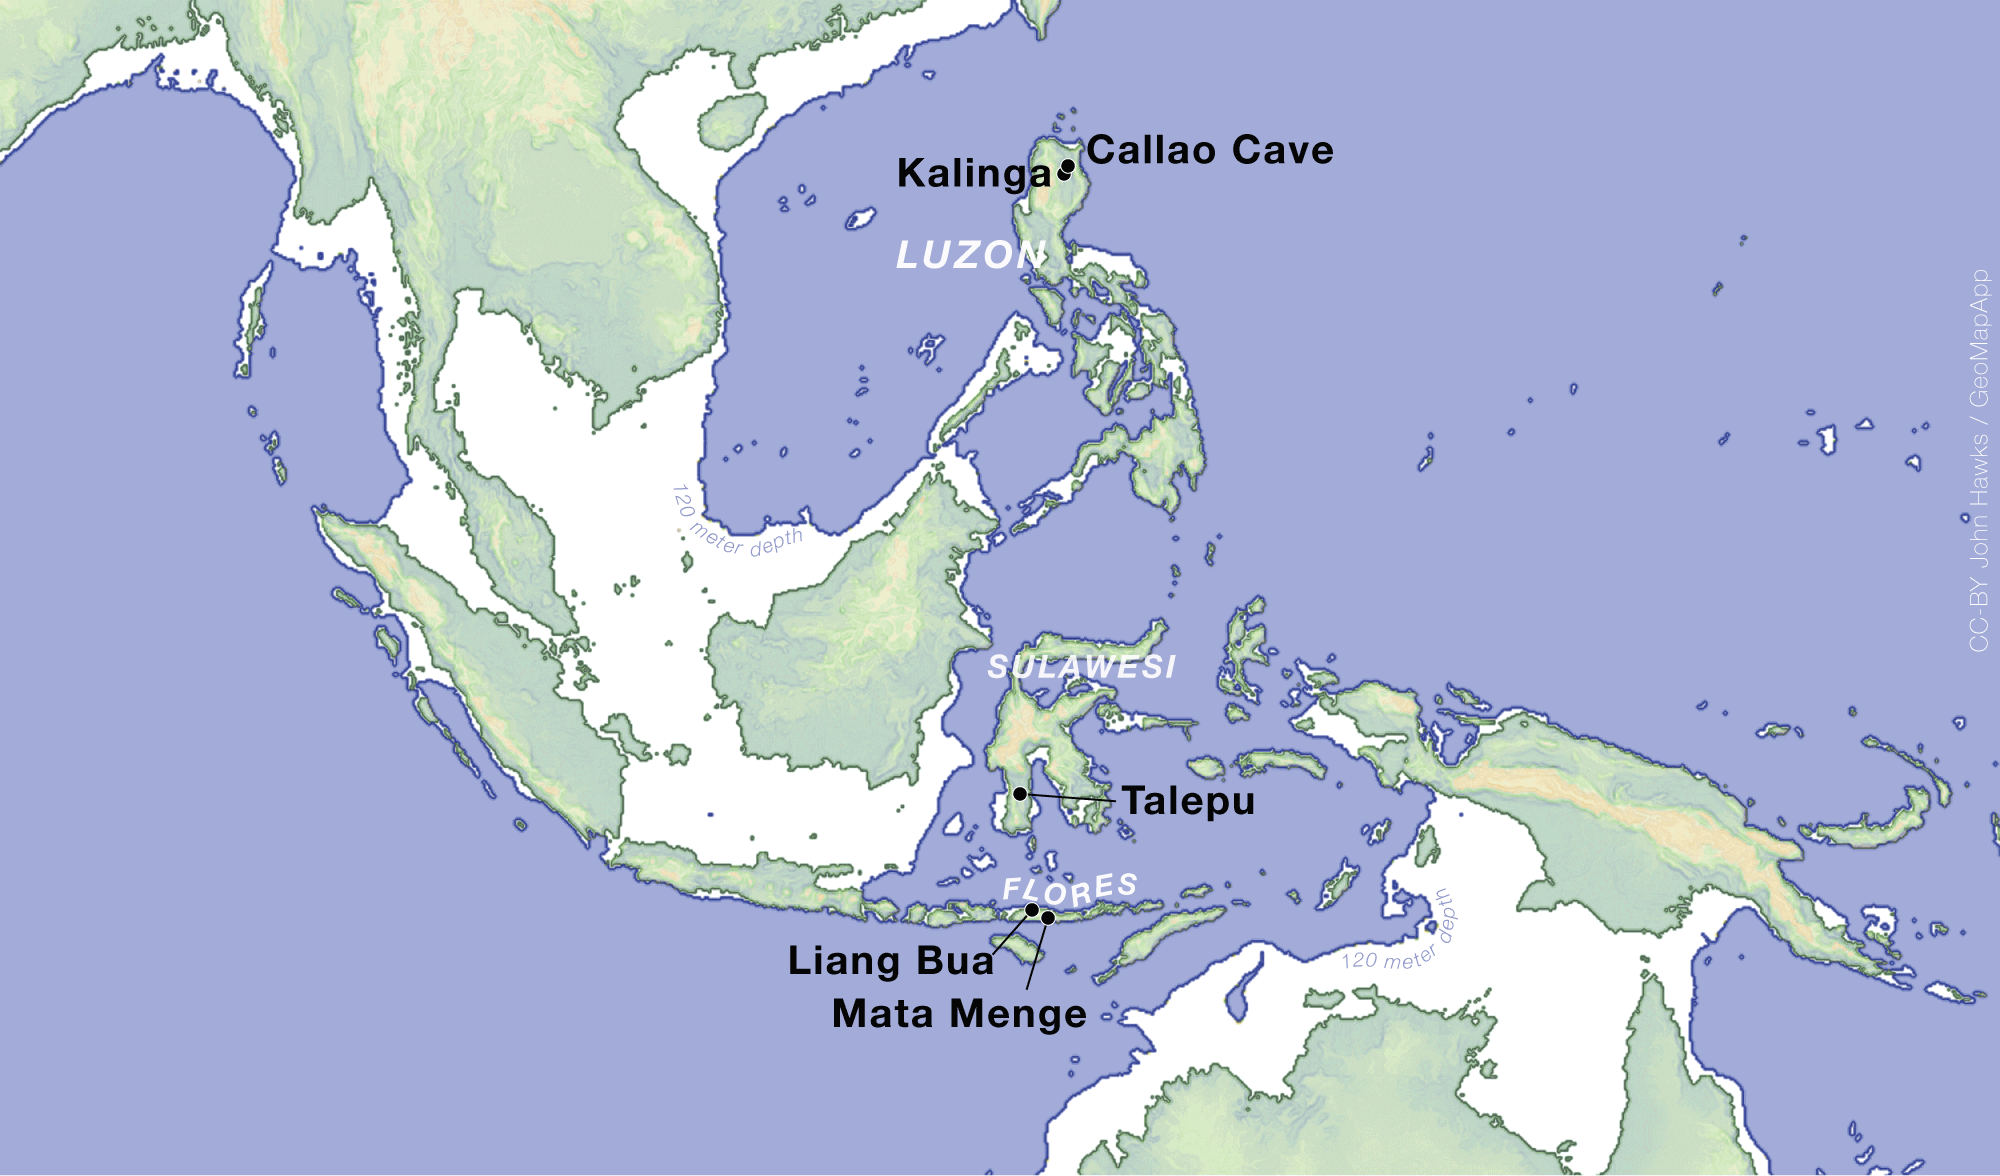 Map of island southeast Asia indicating sites discussed in the text